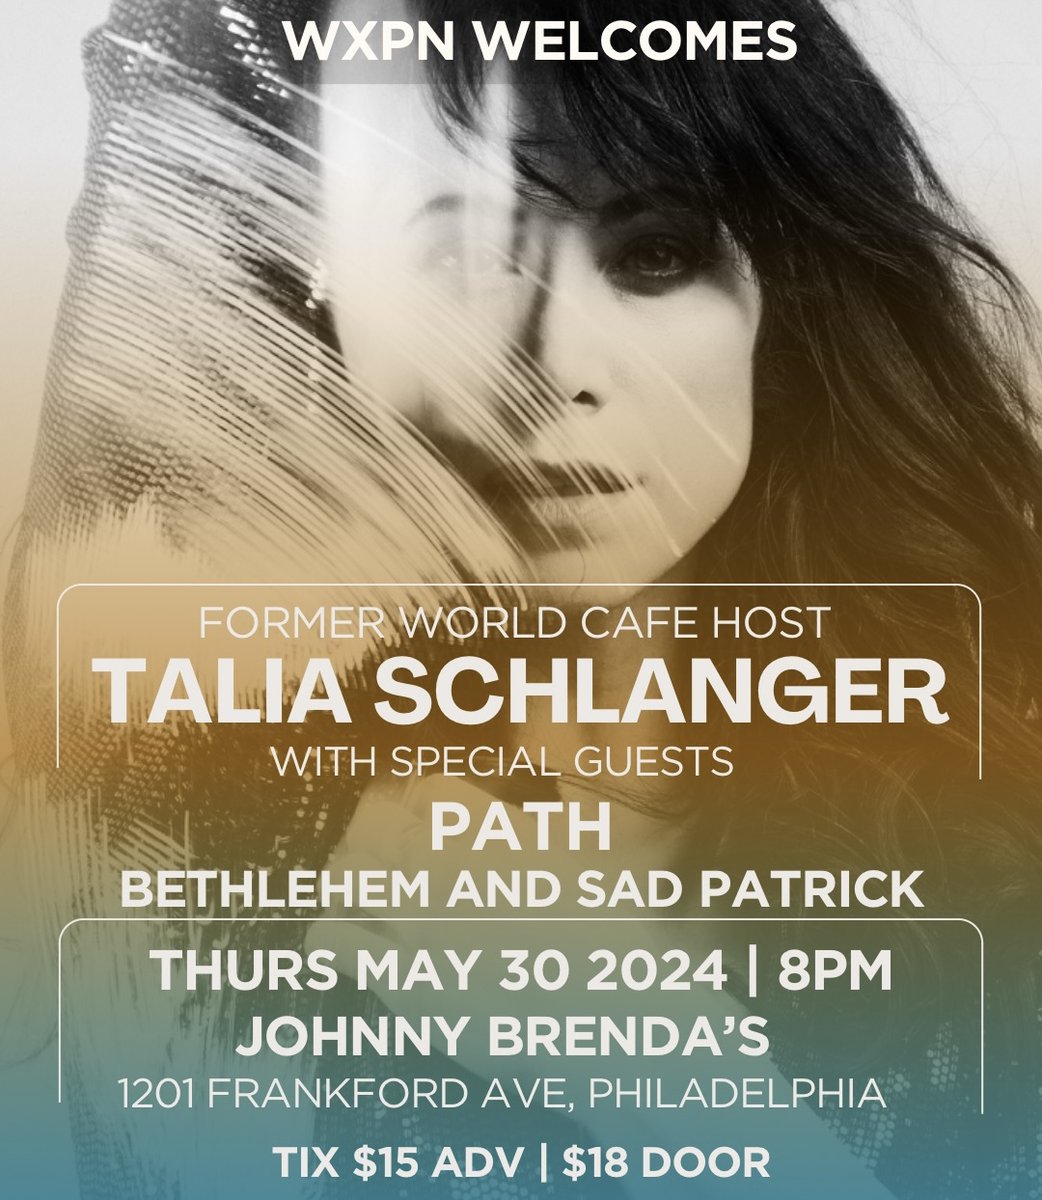 Just a little more than a week away! Our first show at @johnnybrendas, opening for @TaliaSchlanger and sharing the stage with @pathsongs on 5/30. etix.com/ticket/p/42237…